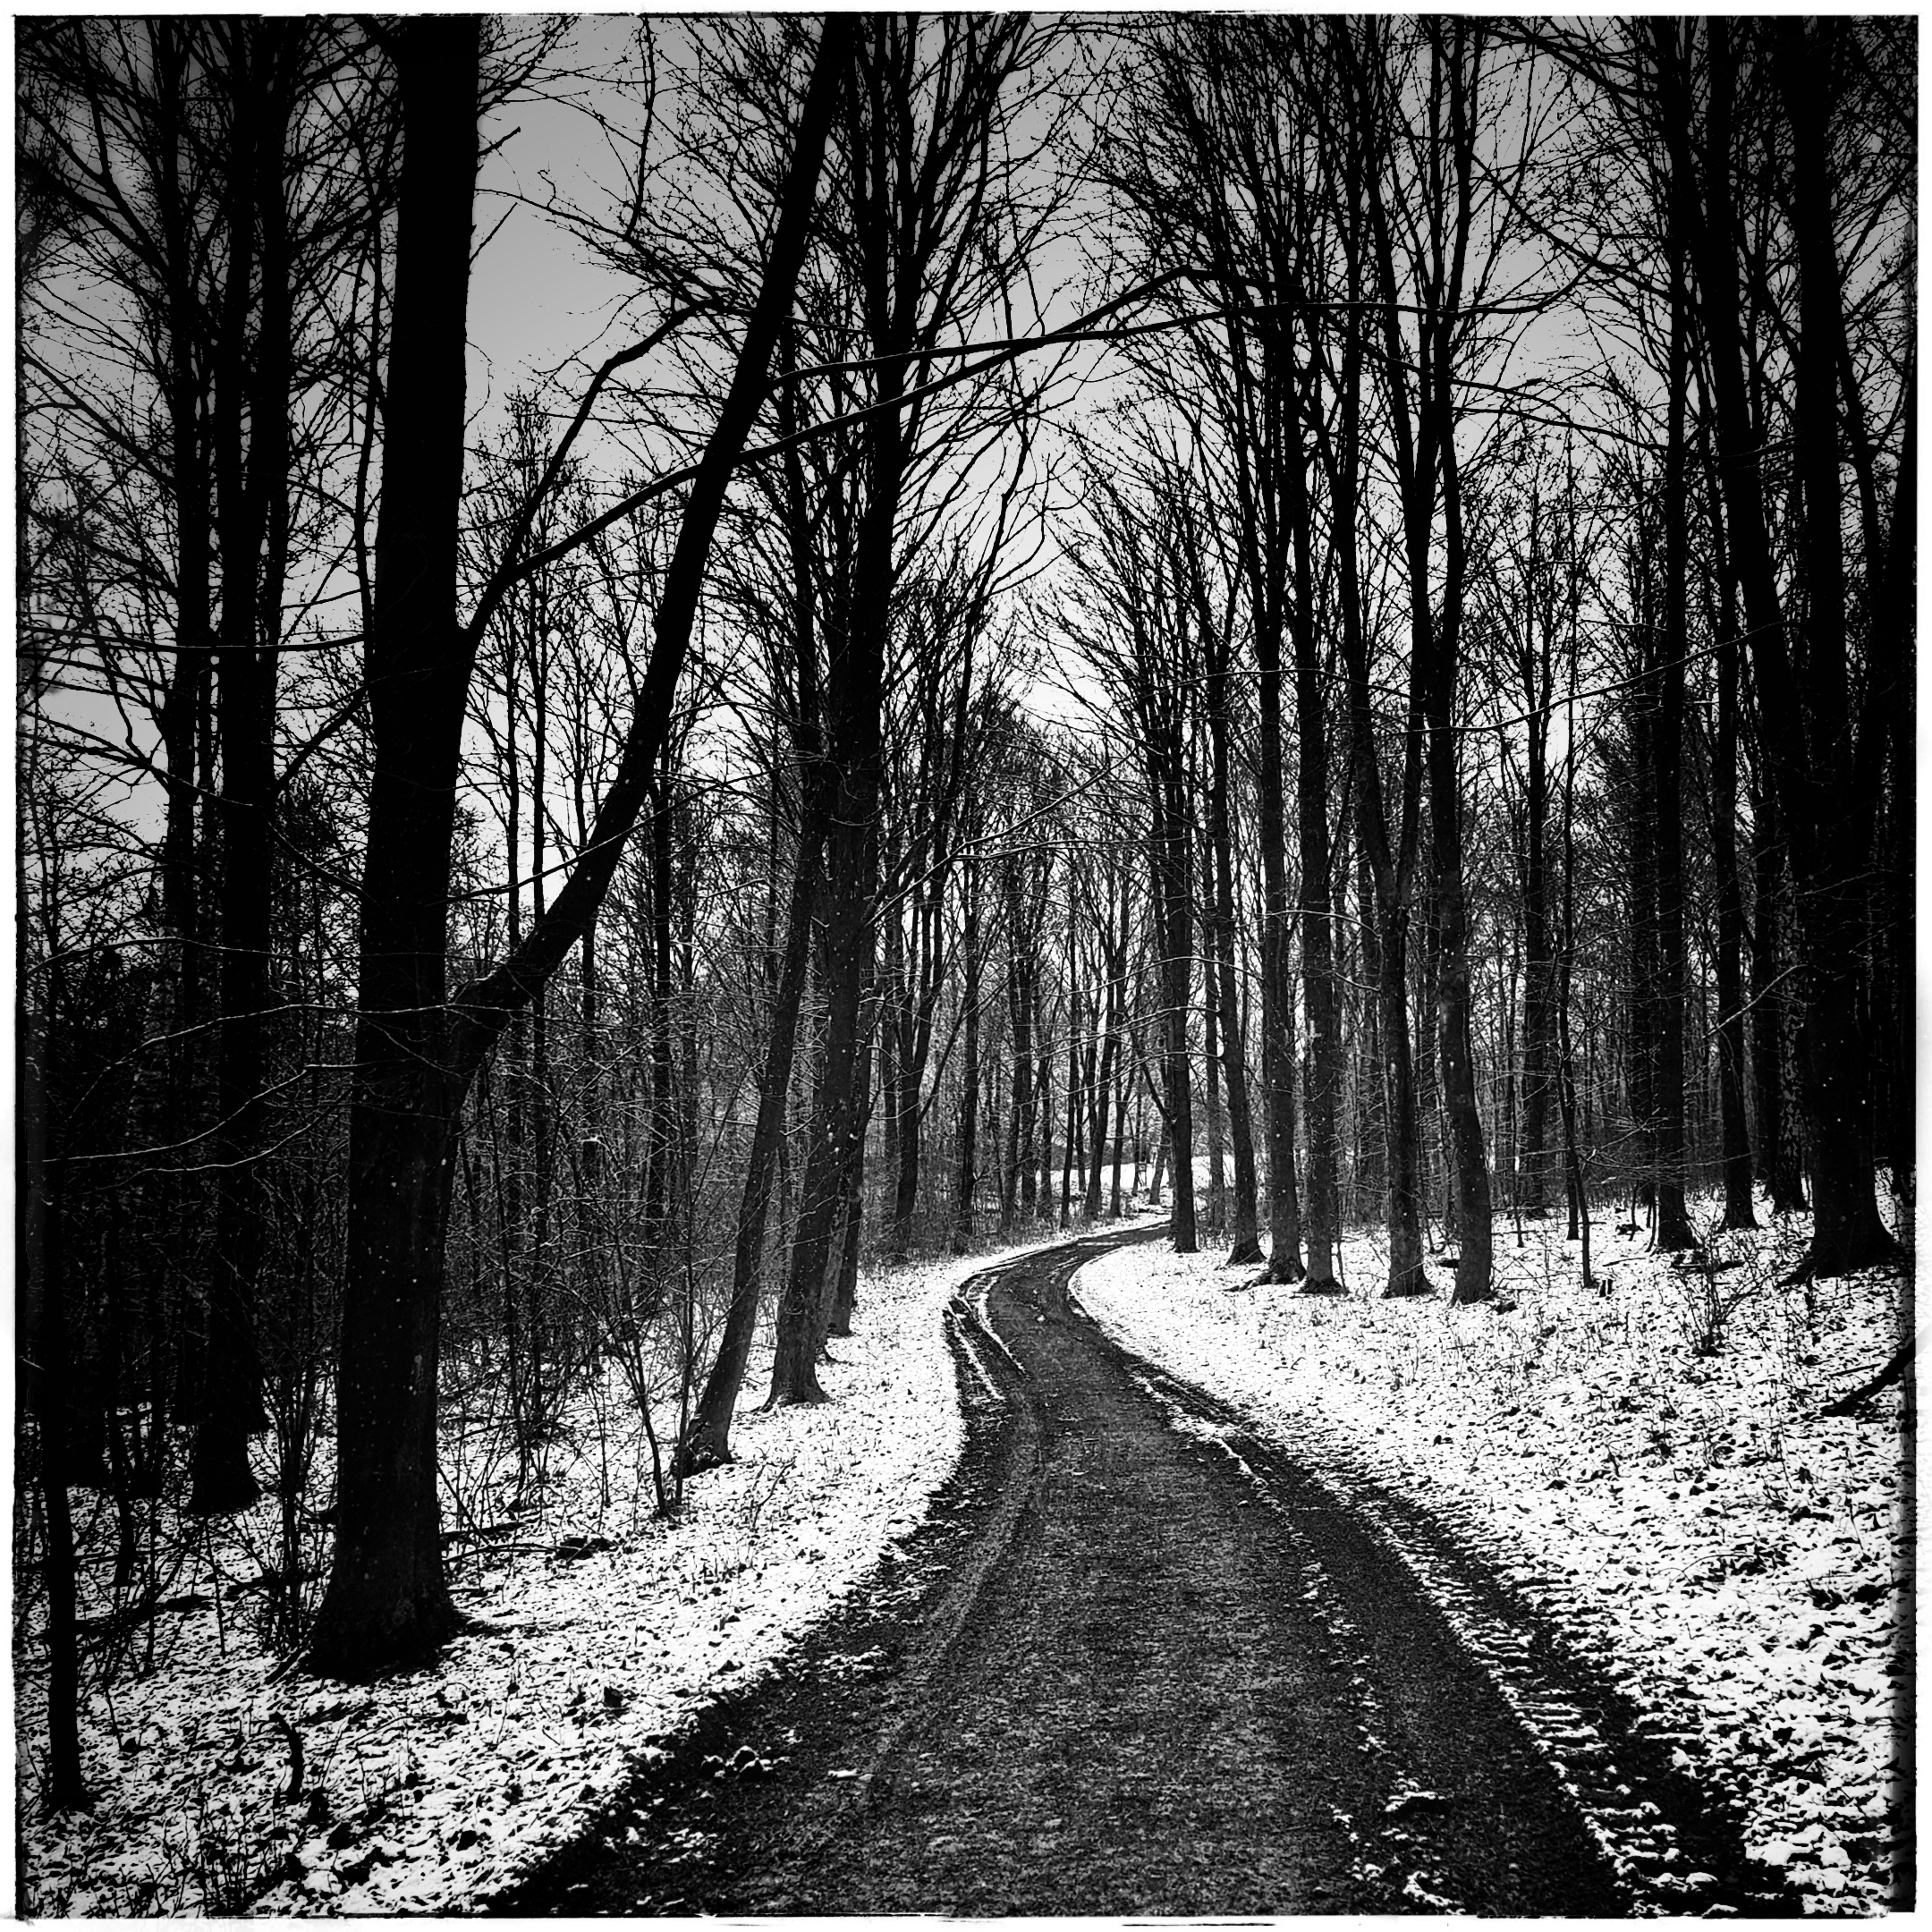 Day 37 - February 6: Long and winding road